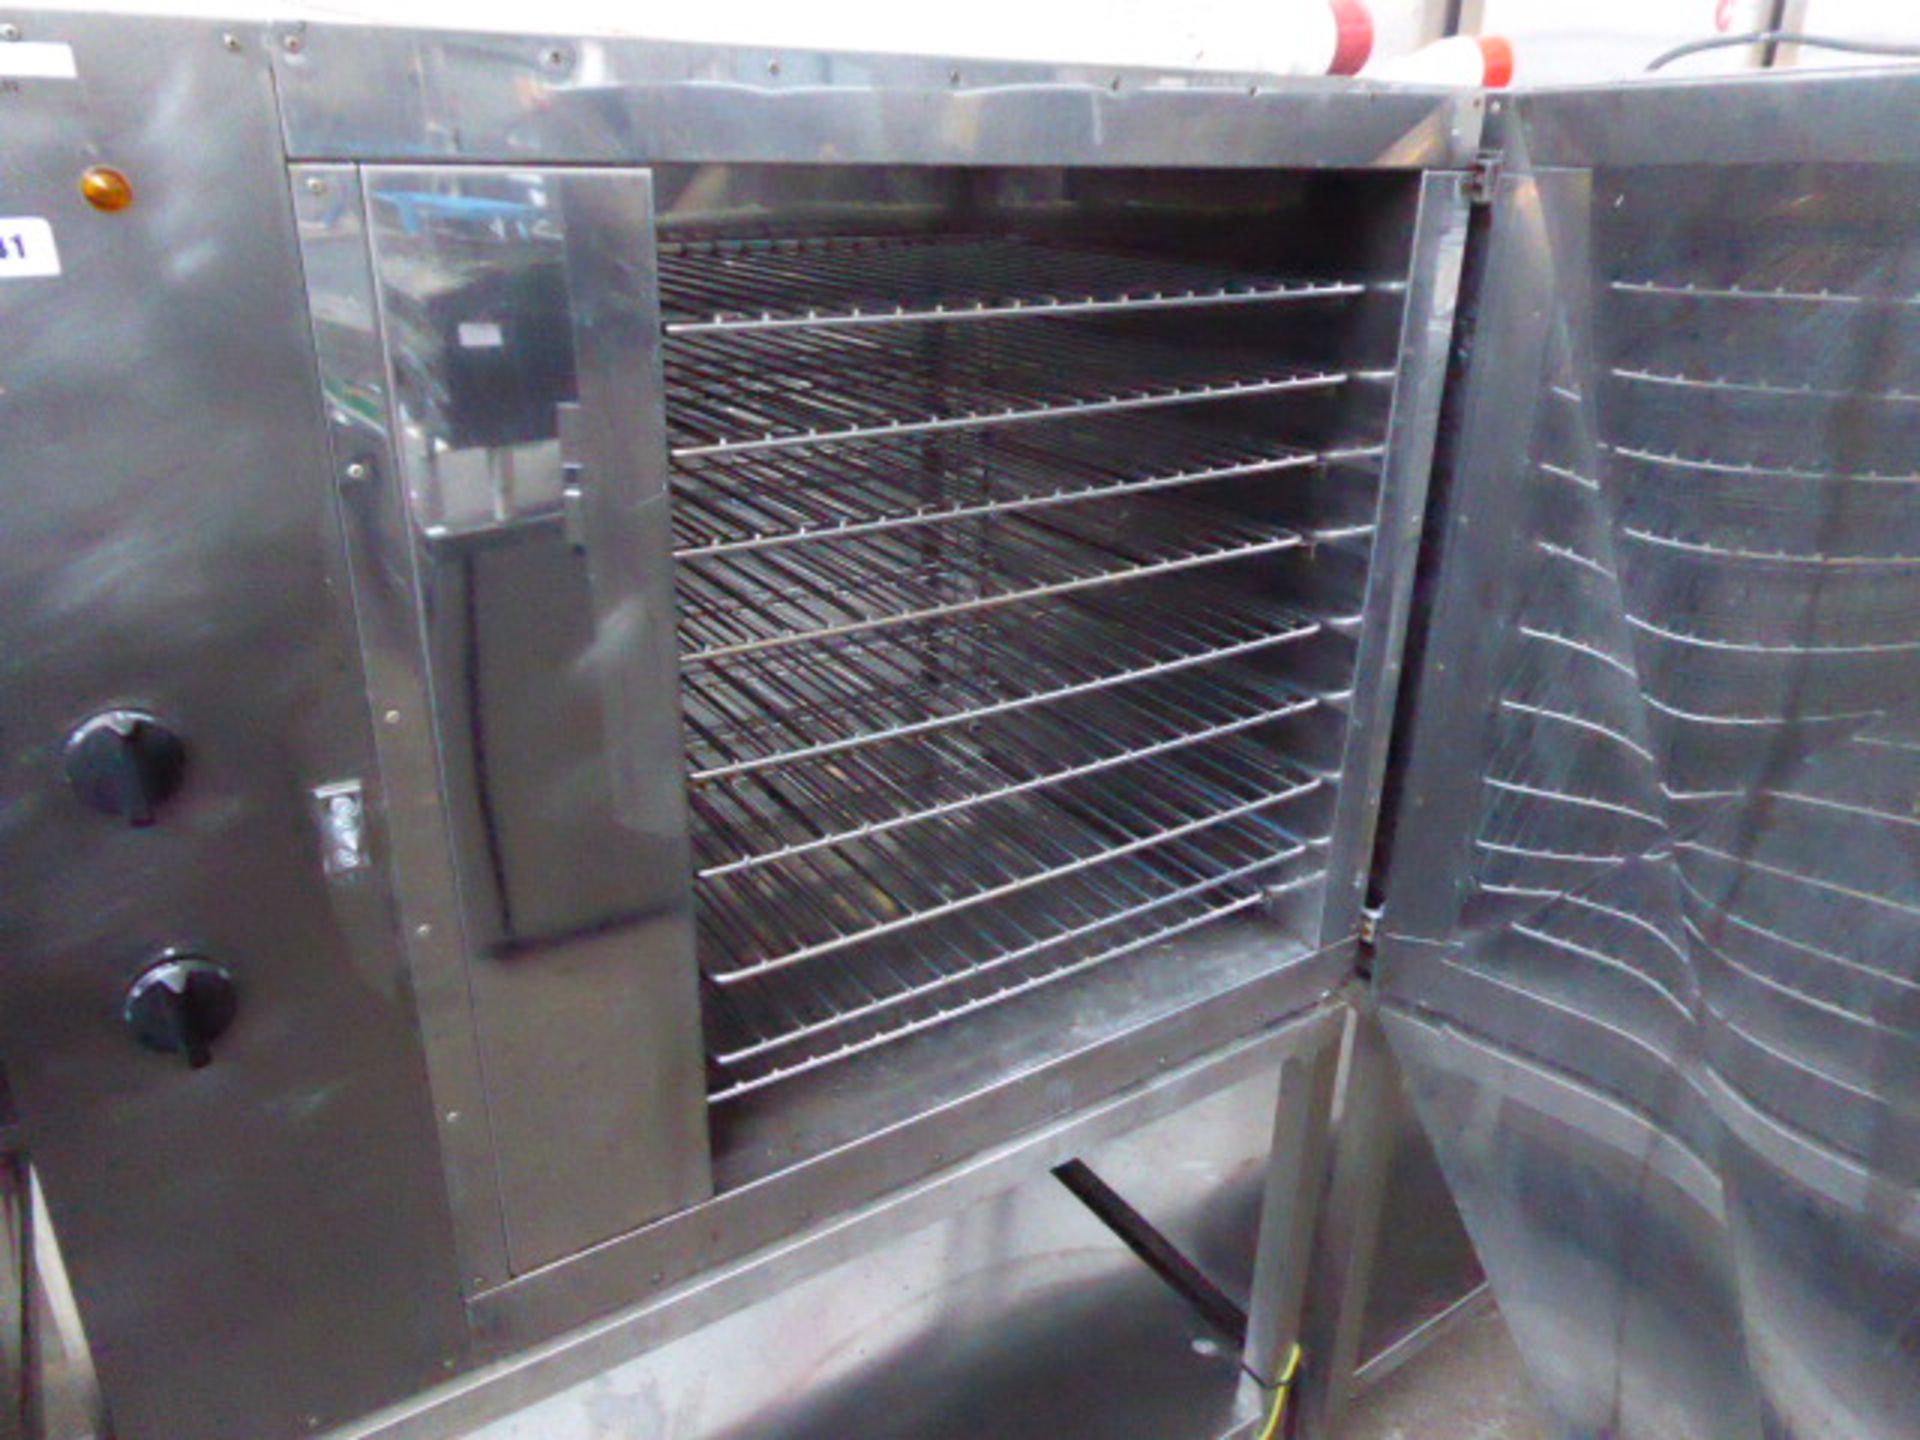 102cm Convotherm regeneration oven with 9 trays 3 phase - Image 2 of 2